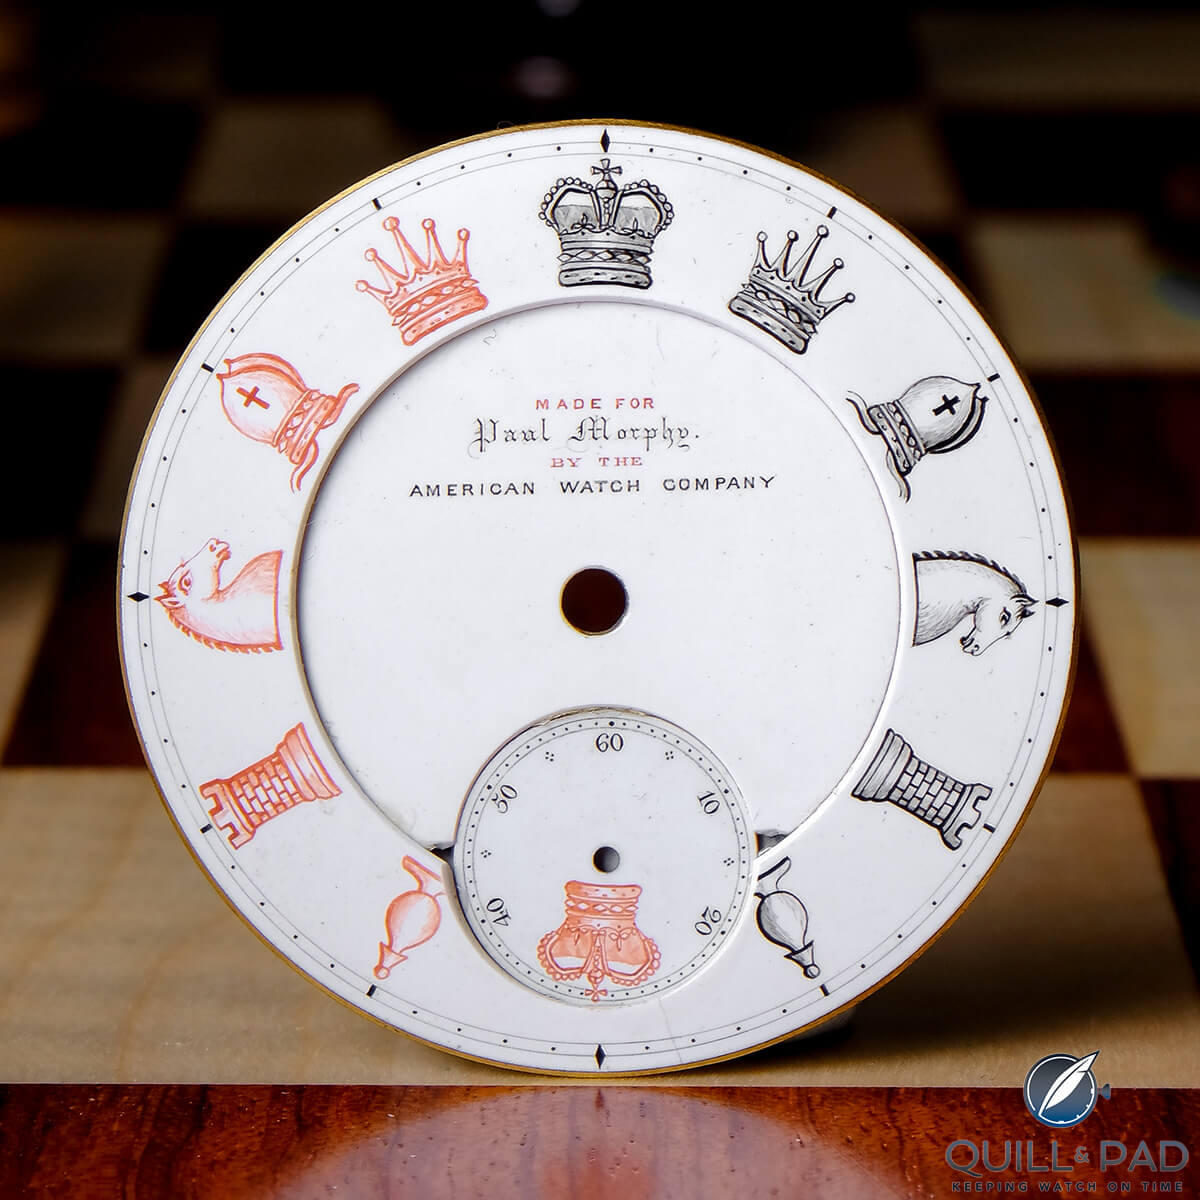 The original dial of Paul Morphy's pocket watch and inspiration for the RGM Chess in Enamel 